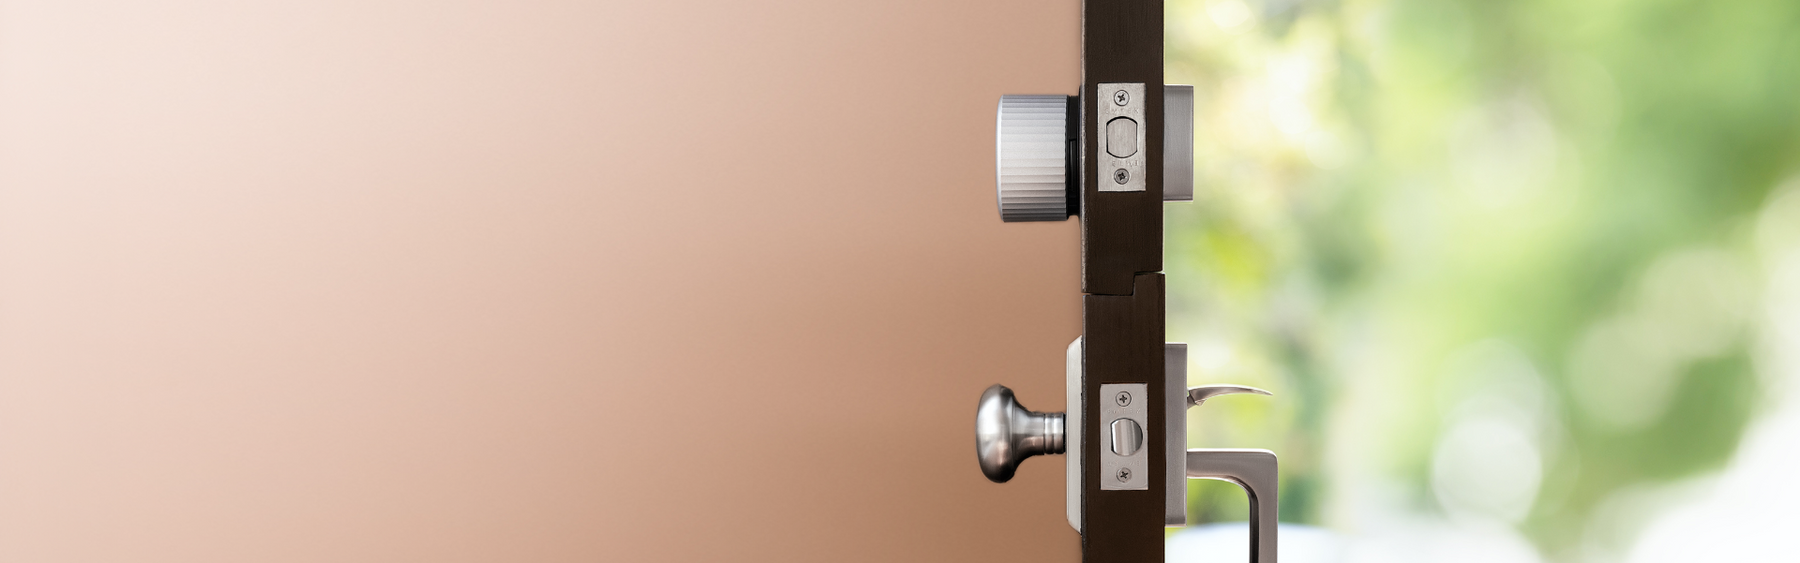 A side view of a silver August wifi lock installed on a door